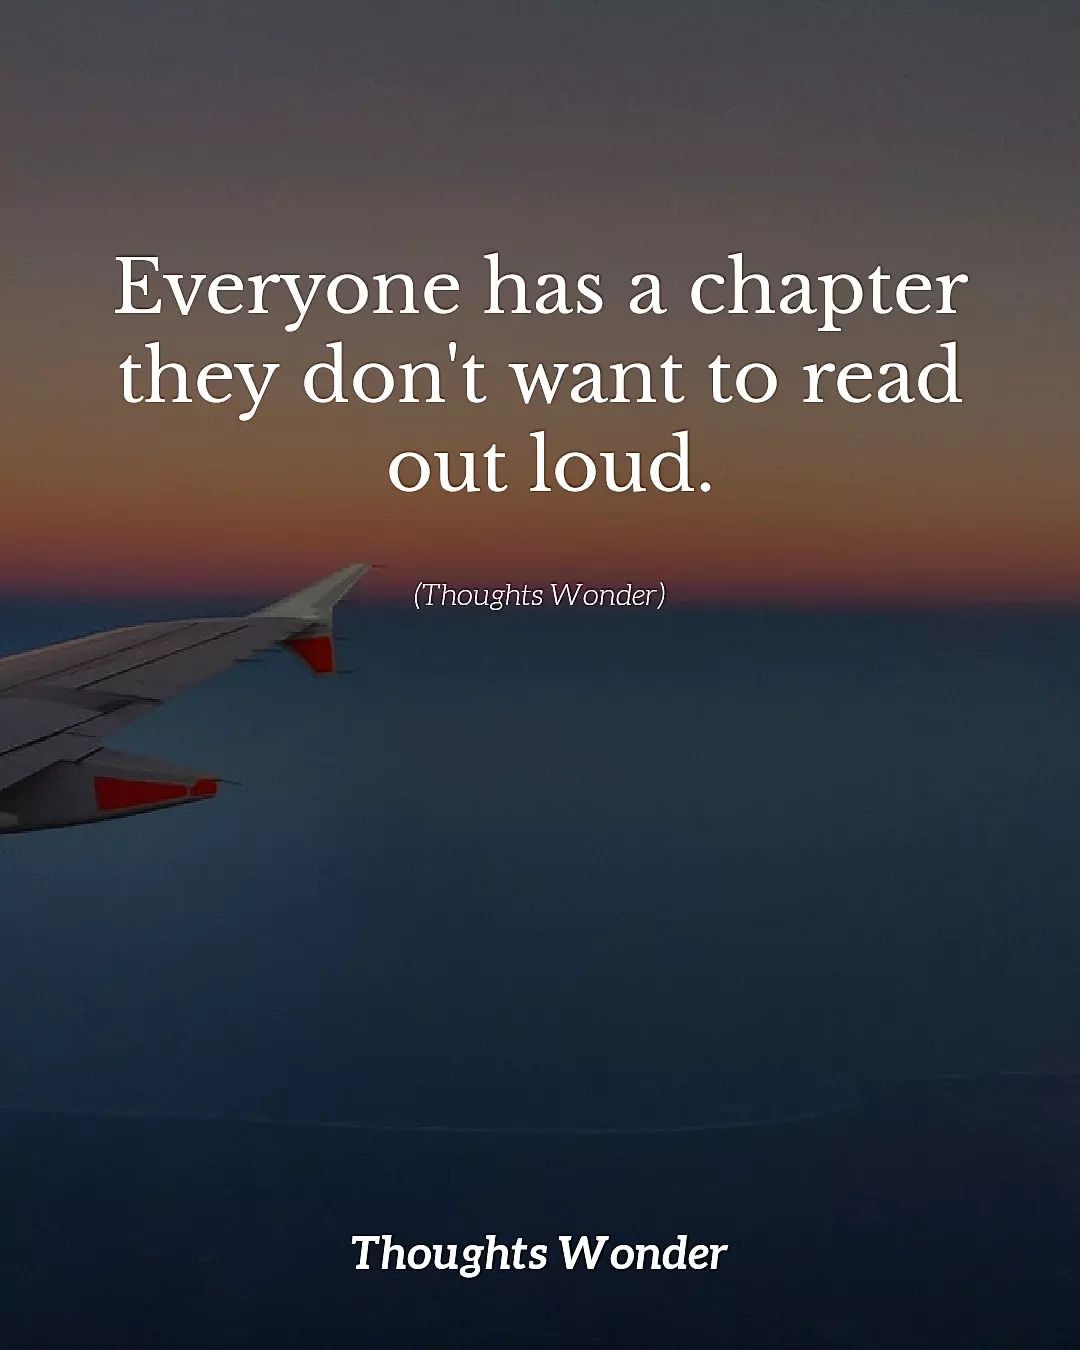 Everyone has a chapter they don't want to read out loud.